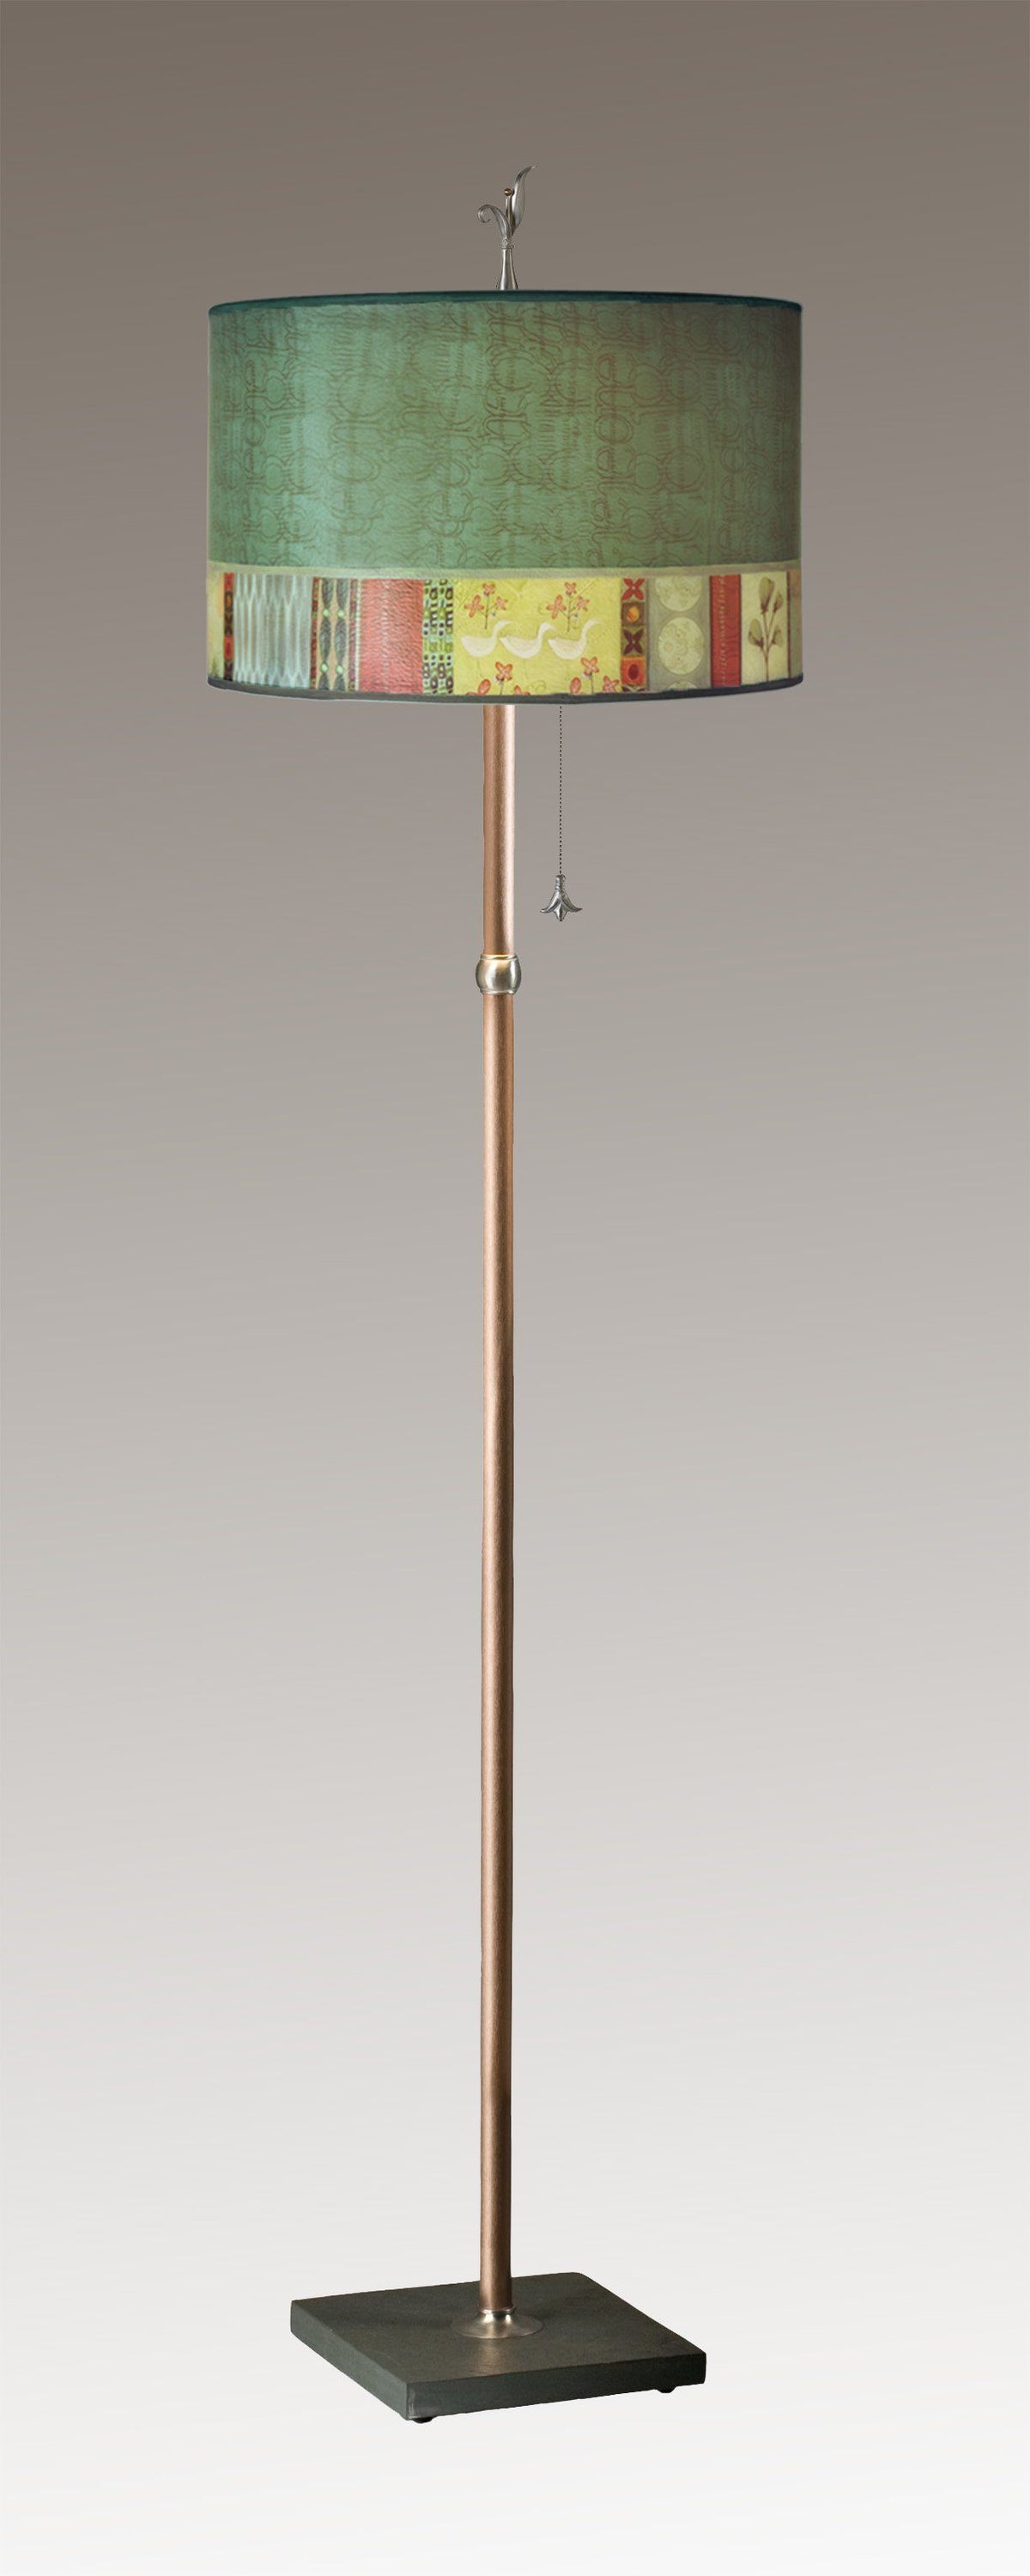 Copper Floor Lamp with Large Drum Lampshade in Melody in Jade